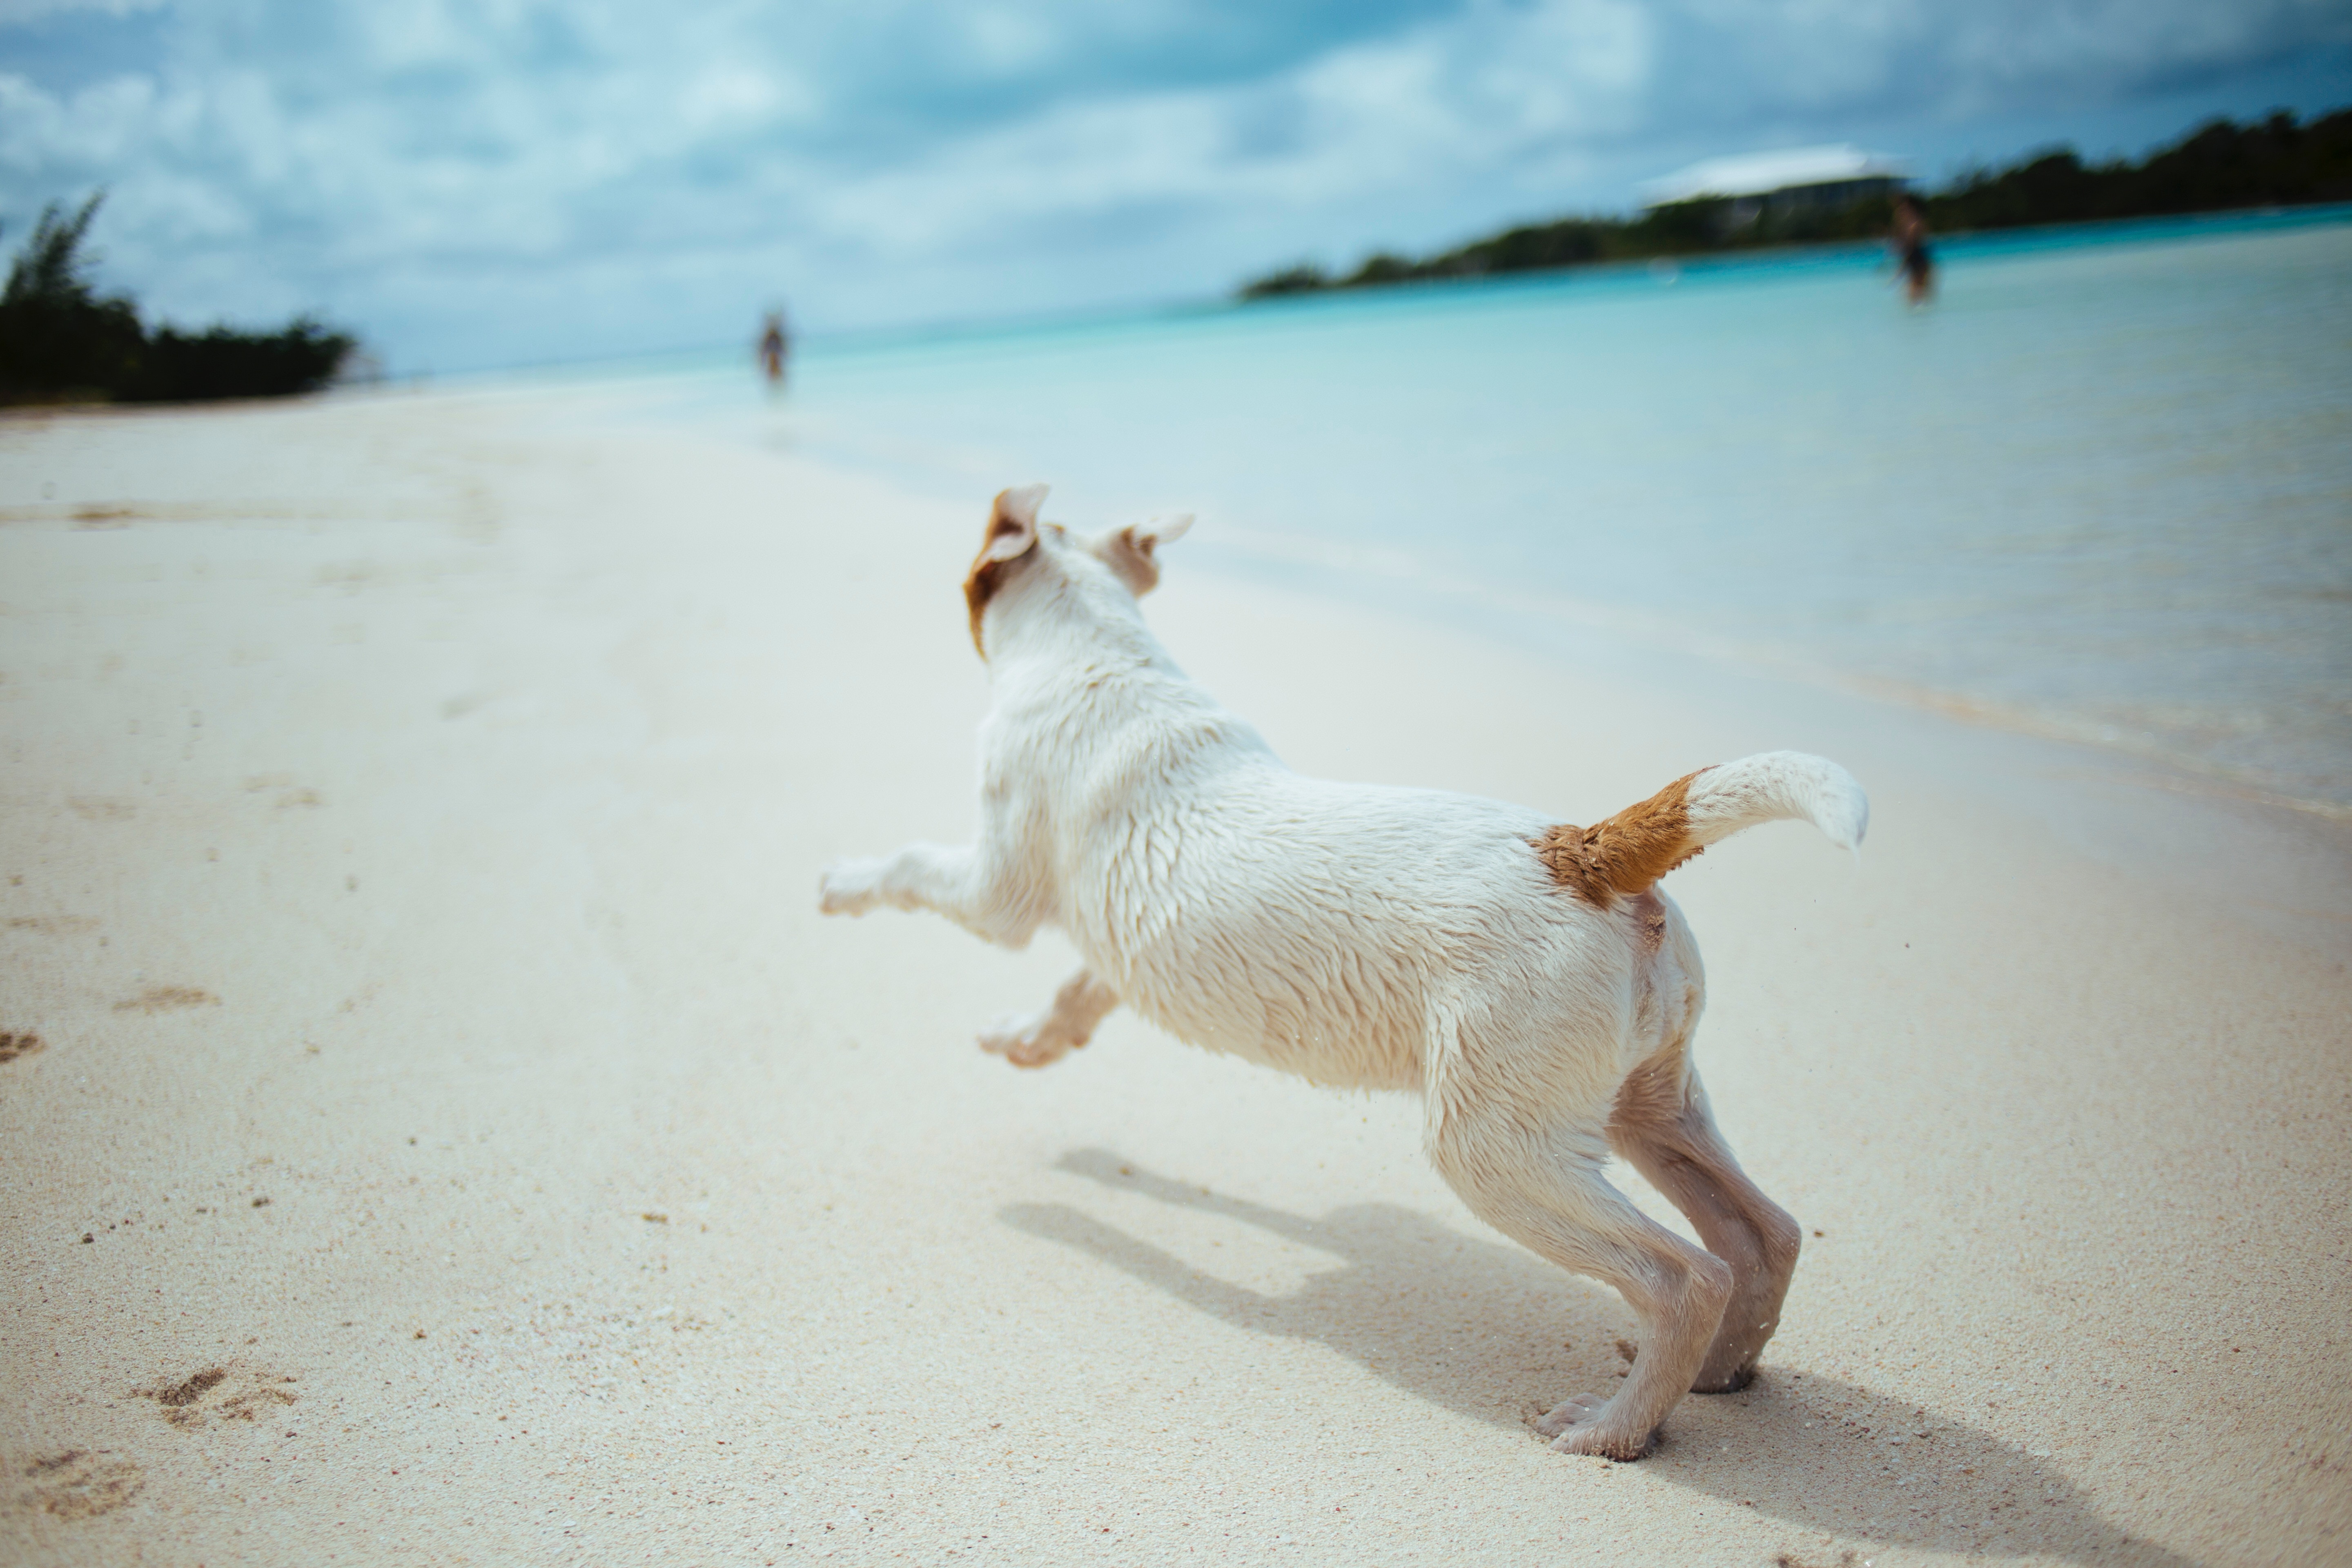 Trupanion Summer Safety Series: Beach Safety for Pets